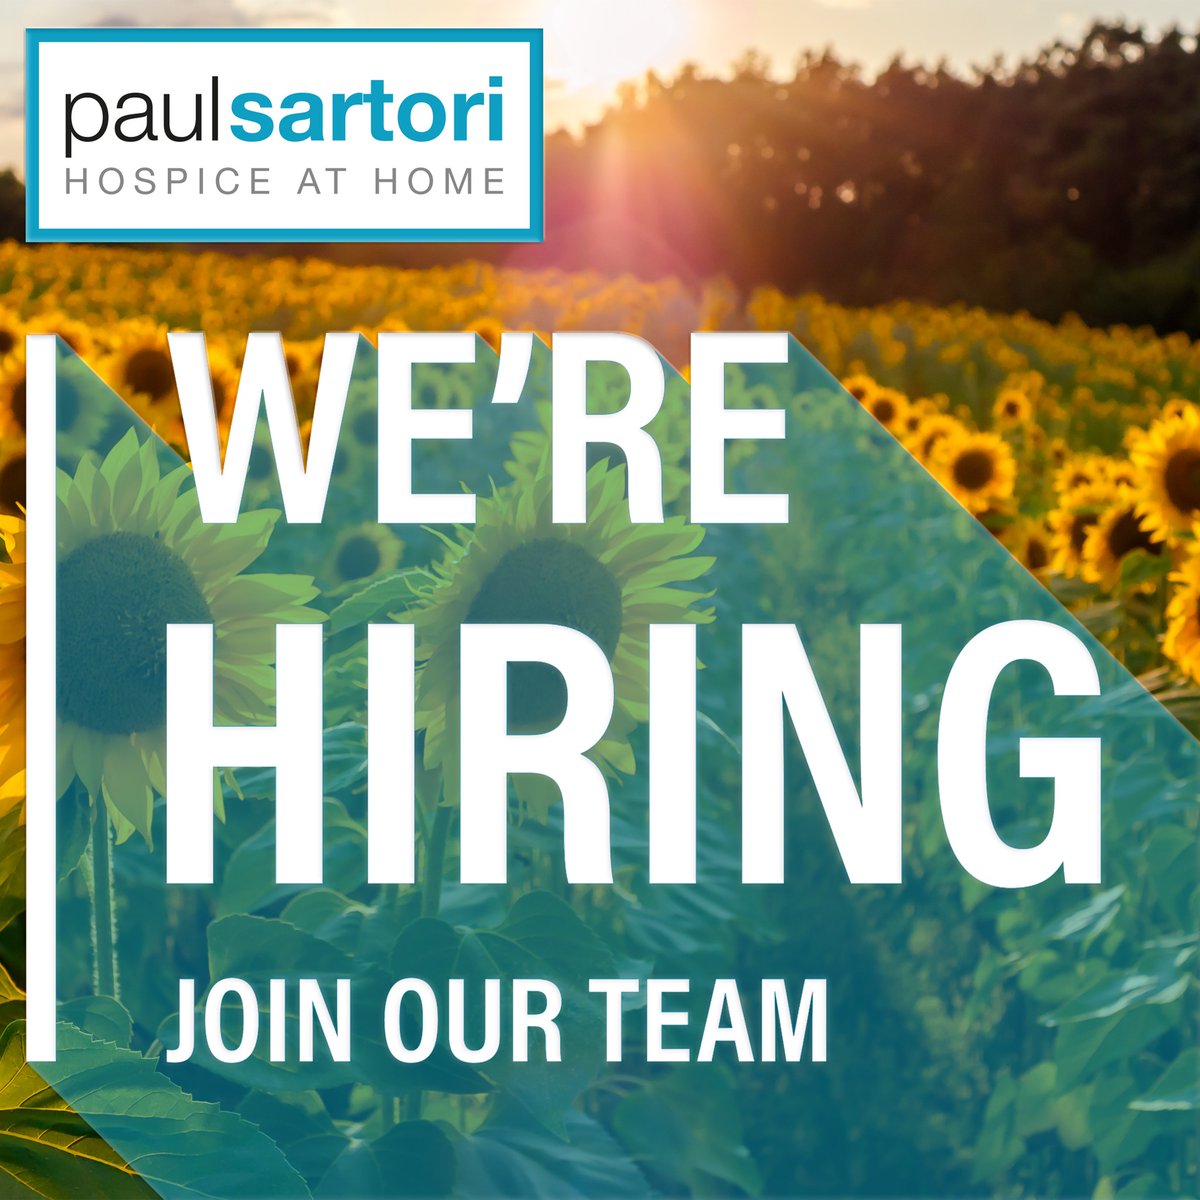 We are currently recruiting for a sales assistant to join our friendly retail team 😁

Take a look 👀 Click the link below:
paulsartori.org/vacancies/

#paulsartoriretail #pembrokeshire #jobvacancy #retail #paulsartoristores #joinus #charityretail #workforus #supportlocal